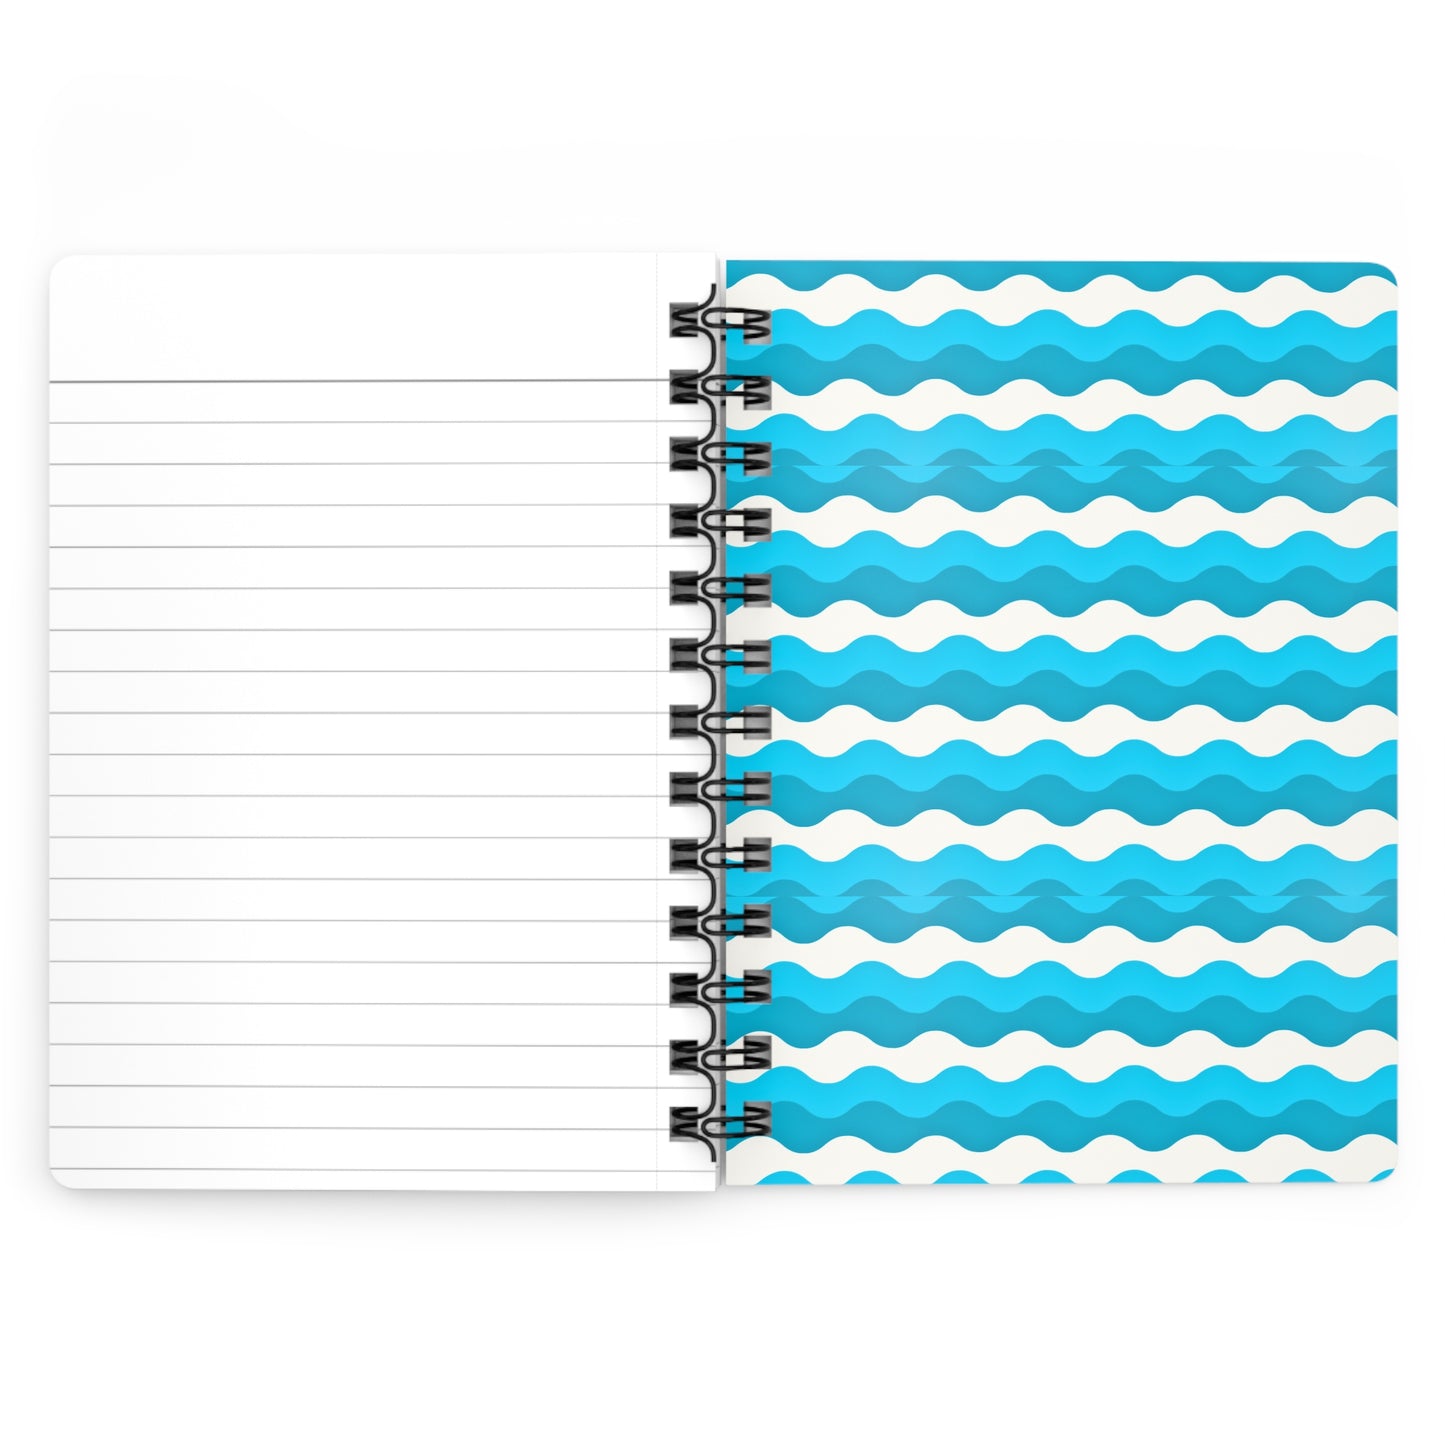 Groovy Waves Vibes Midcentury Modern Turquoise Ocean Vacation Decorative Travel Writing Sketch Spiral Bound Journal